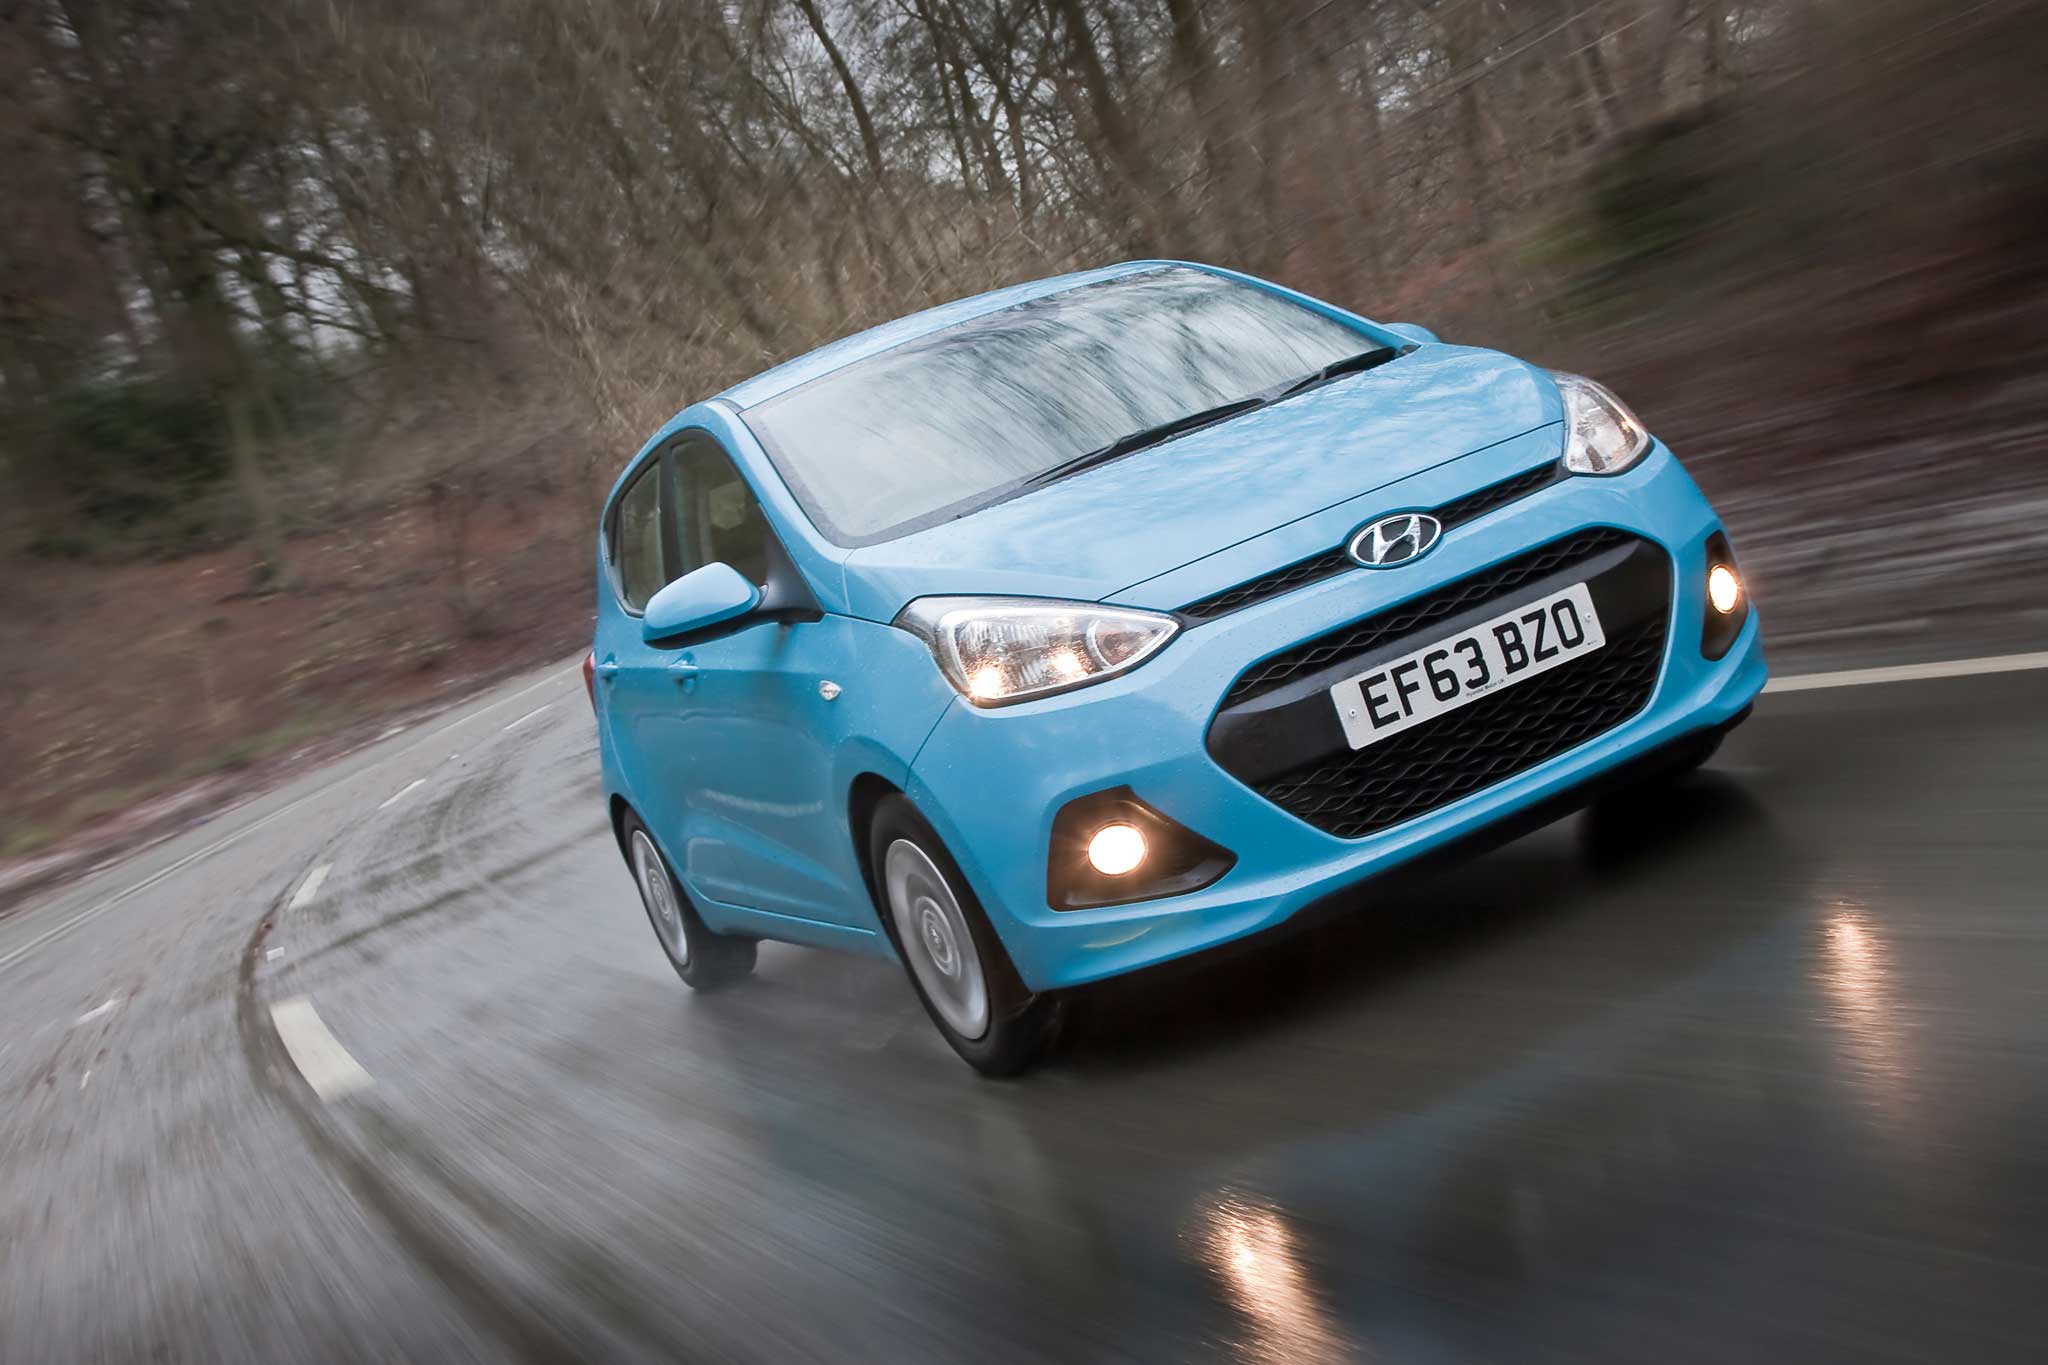 The new Hyundai i10 is bigger, has more gadgetry, is more expensive and overall seems more grown-up